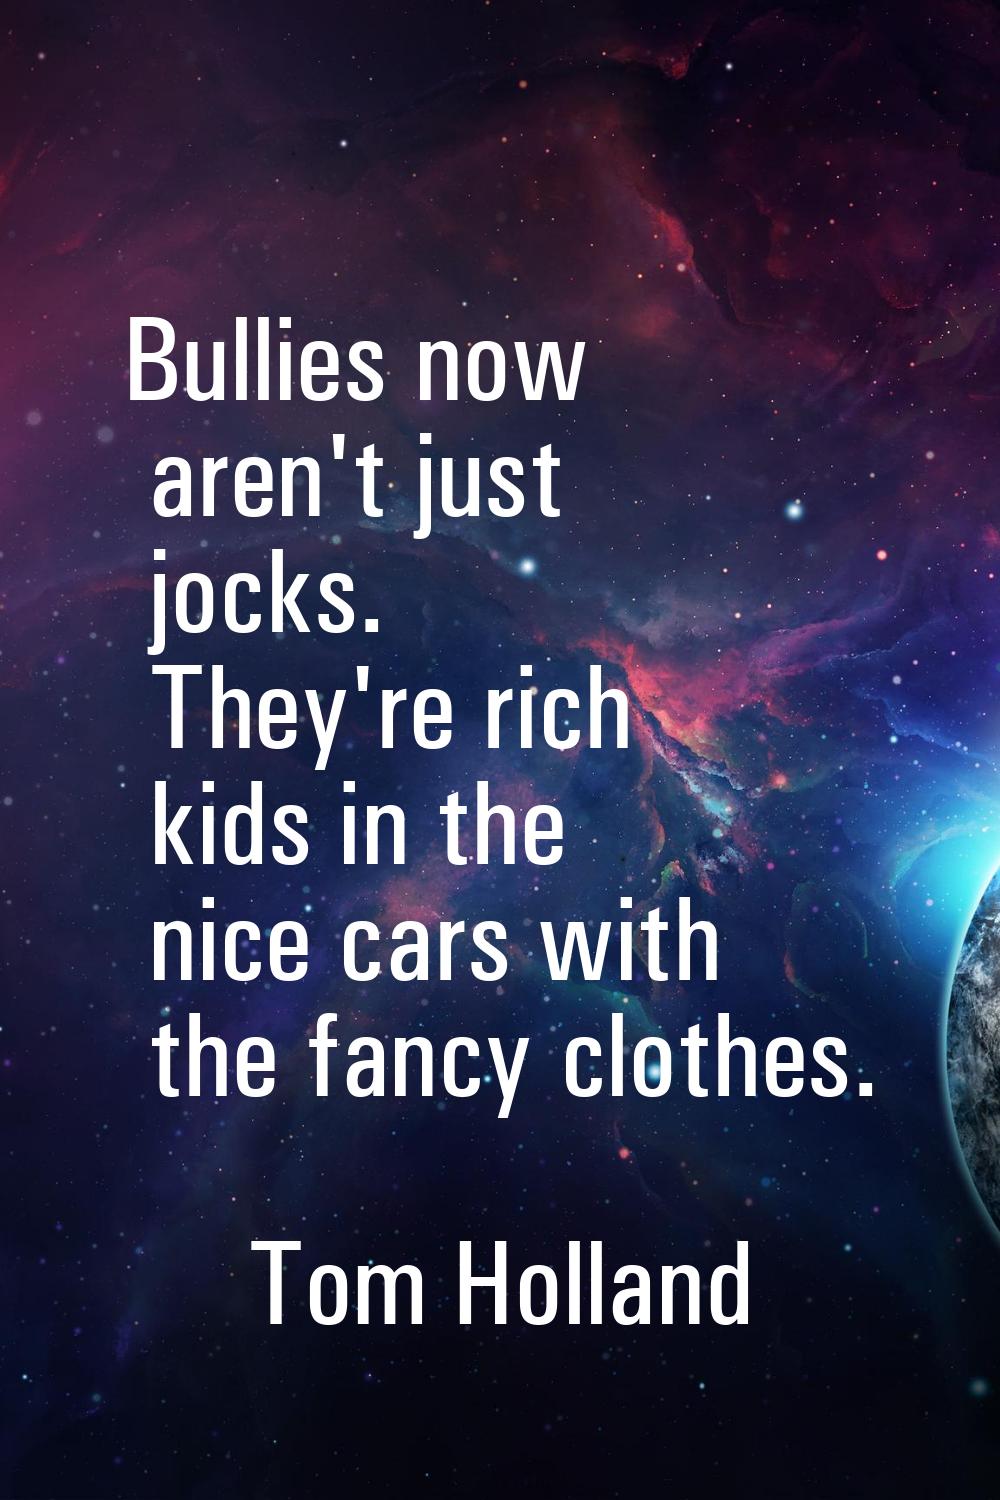 Bullies now aren't just jocks. They're rich kids in the nice cars with the fancy clothes.